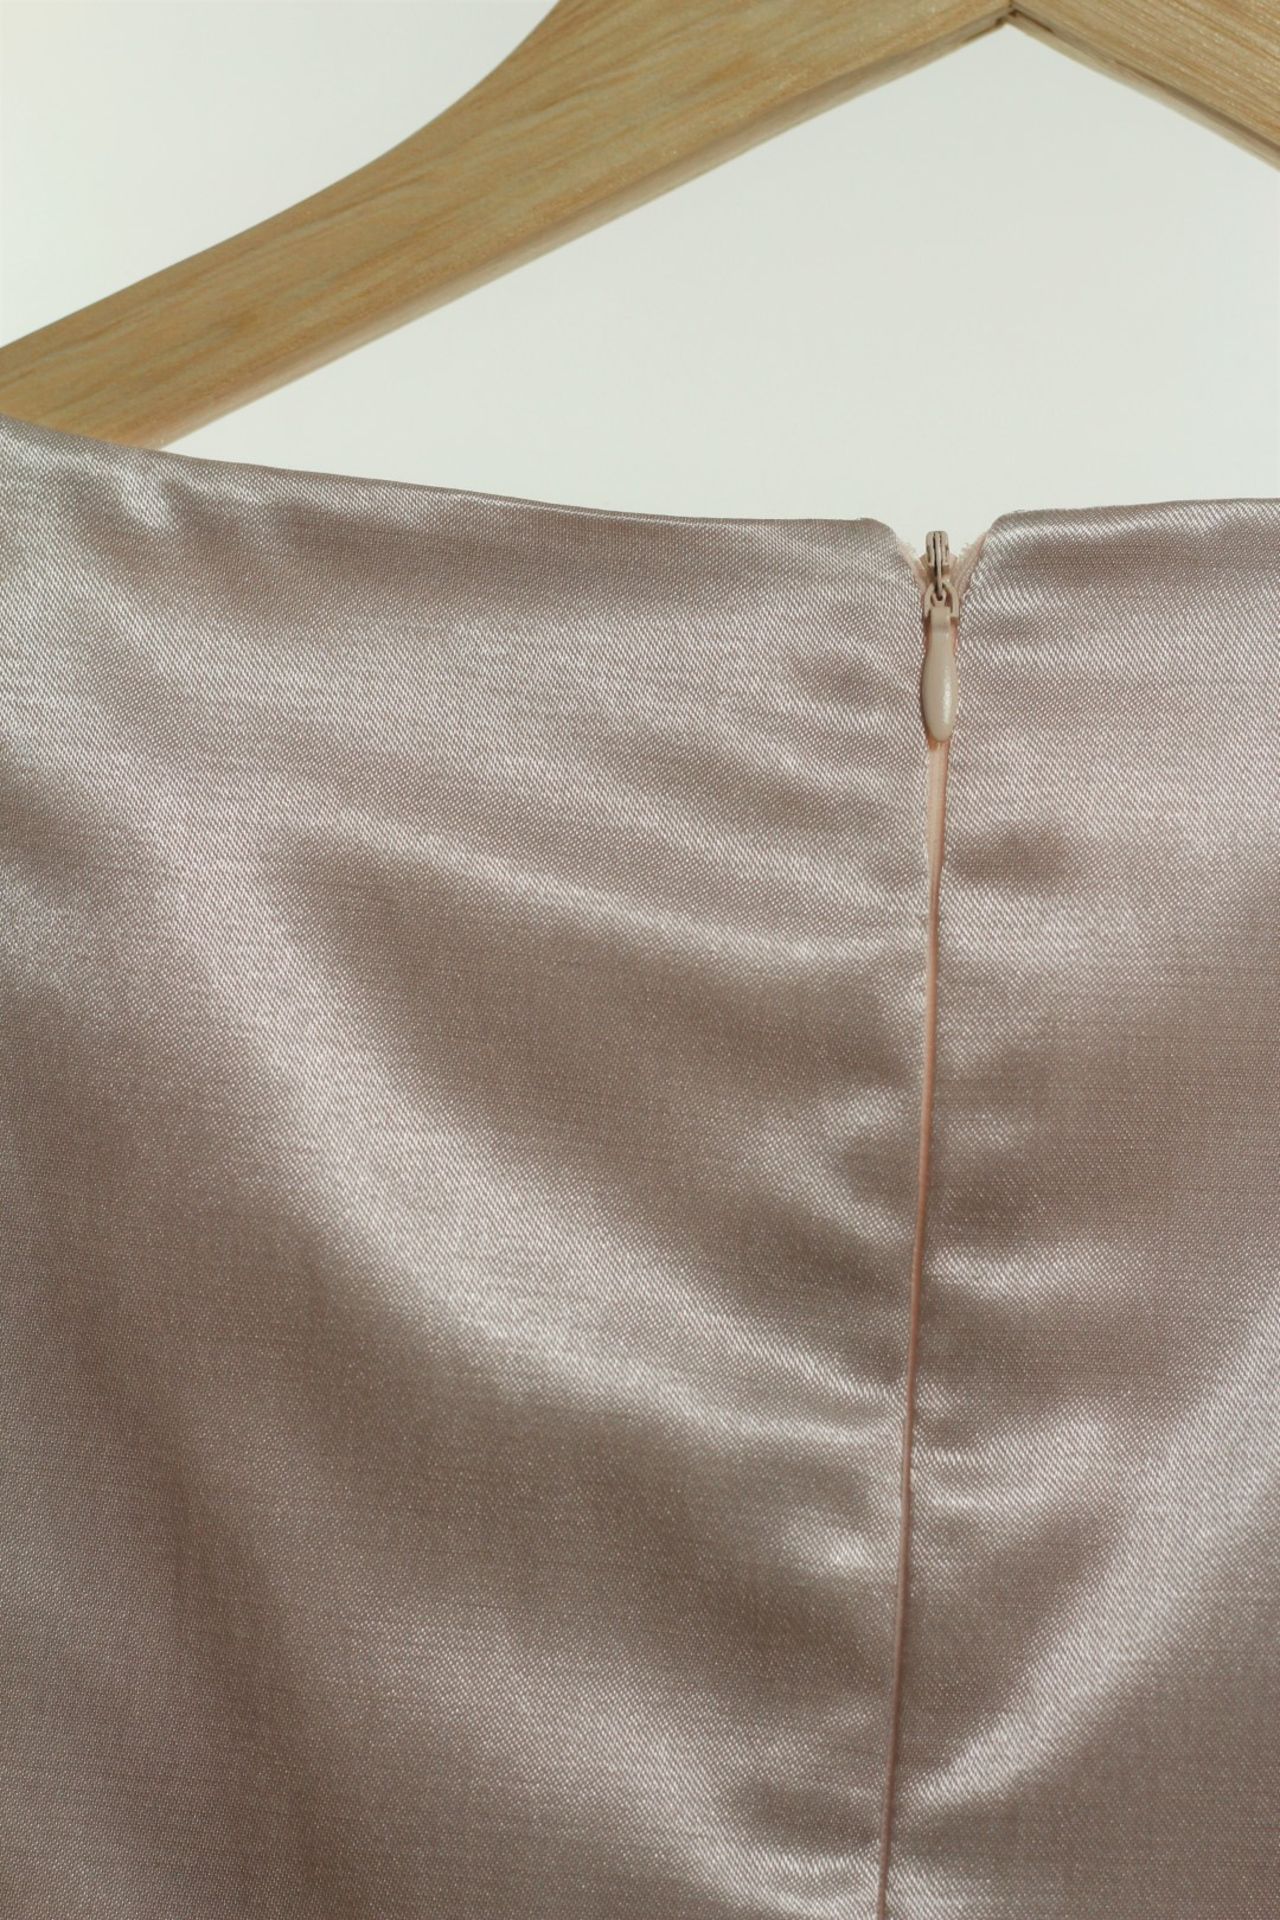 1 x Boutique Le Duc Pale Rose Vest - From a High End Clothing Boutique In The - Image 2 of 8